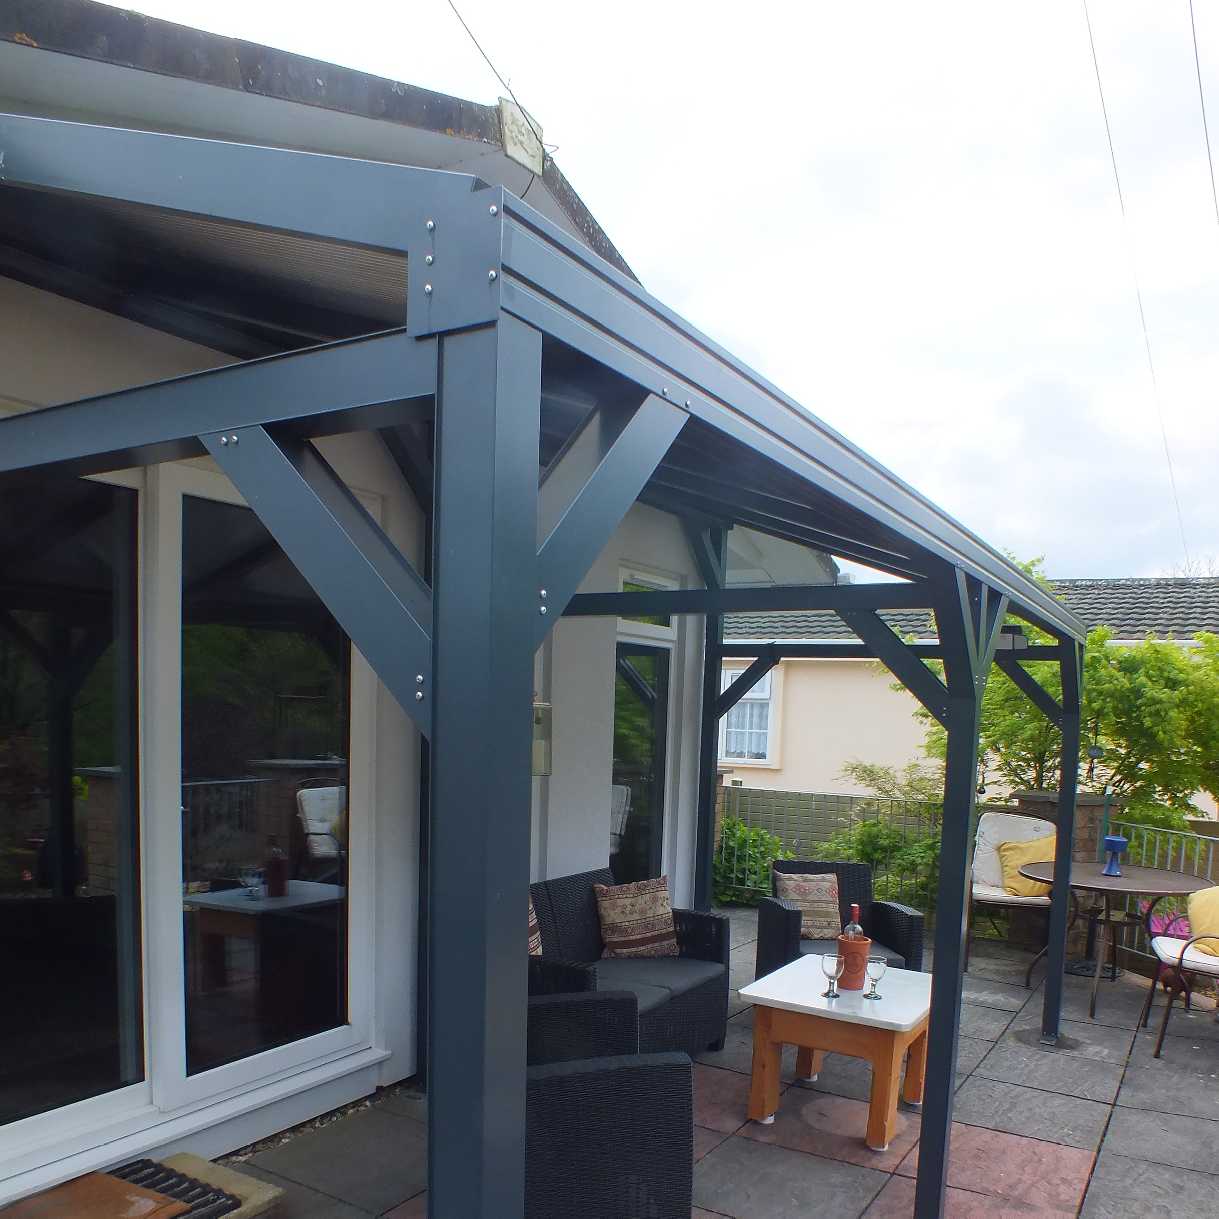 Affordable Omega Smart Free-Standing, Anthracite Grey MonoPitch Roof Canopy with 16mm Polycarbonate Glazing - 7.8m (W) x 4.0m (P), (8) Supporting Posts